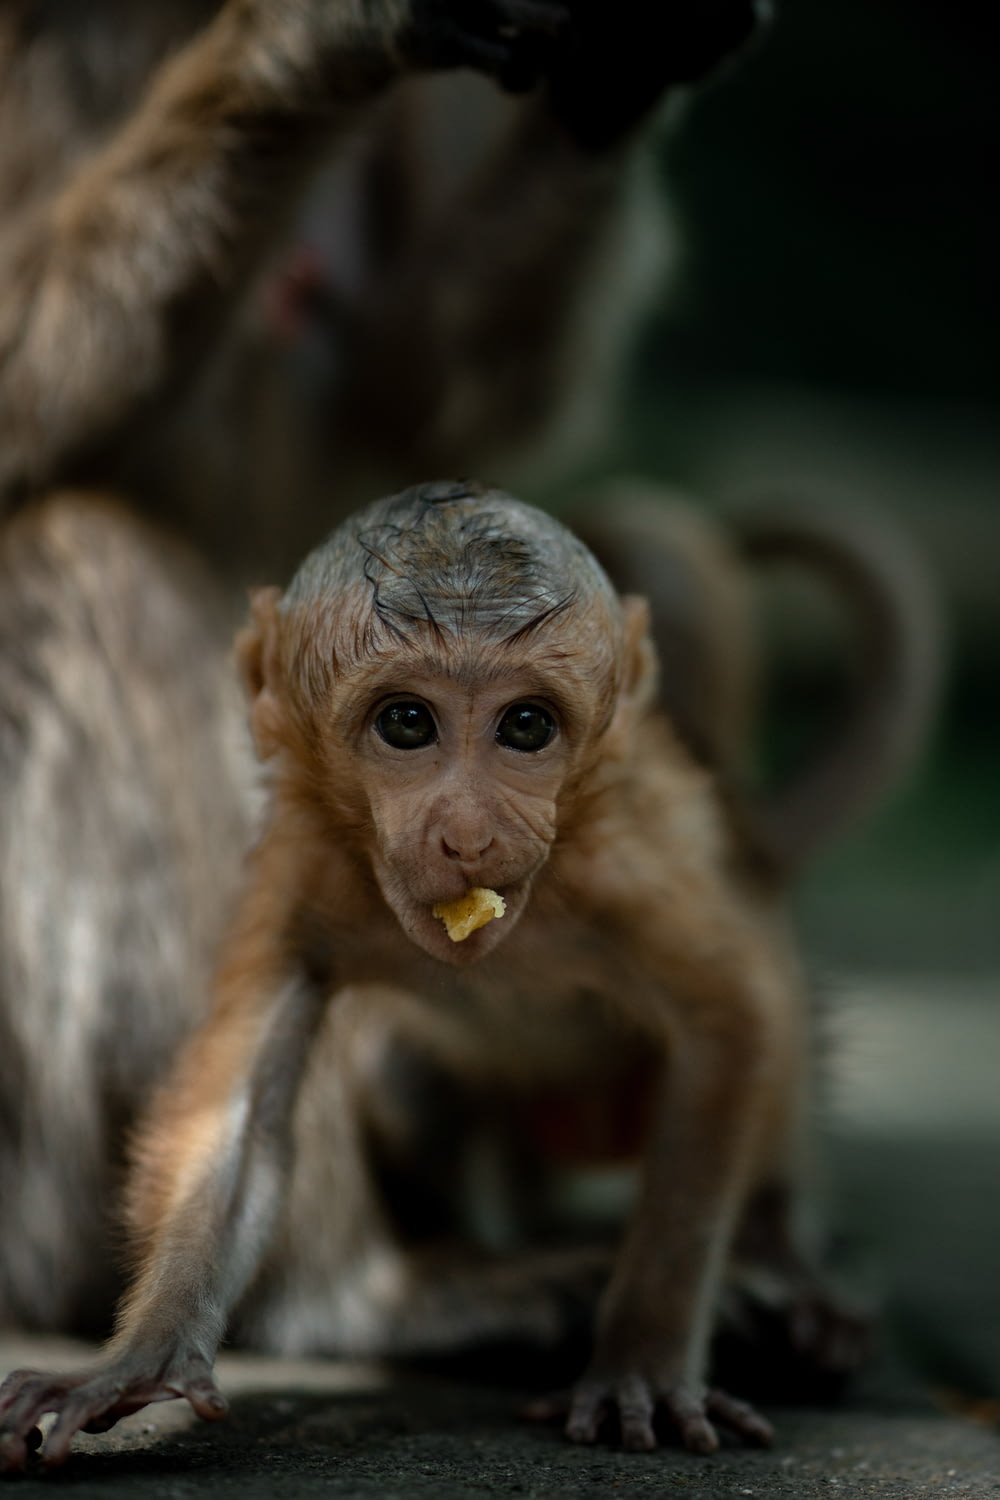 a monkey eating something with its mouth open